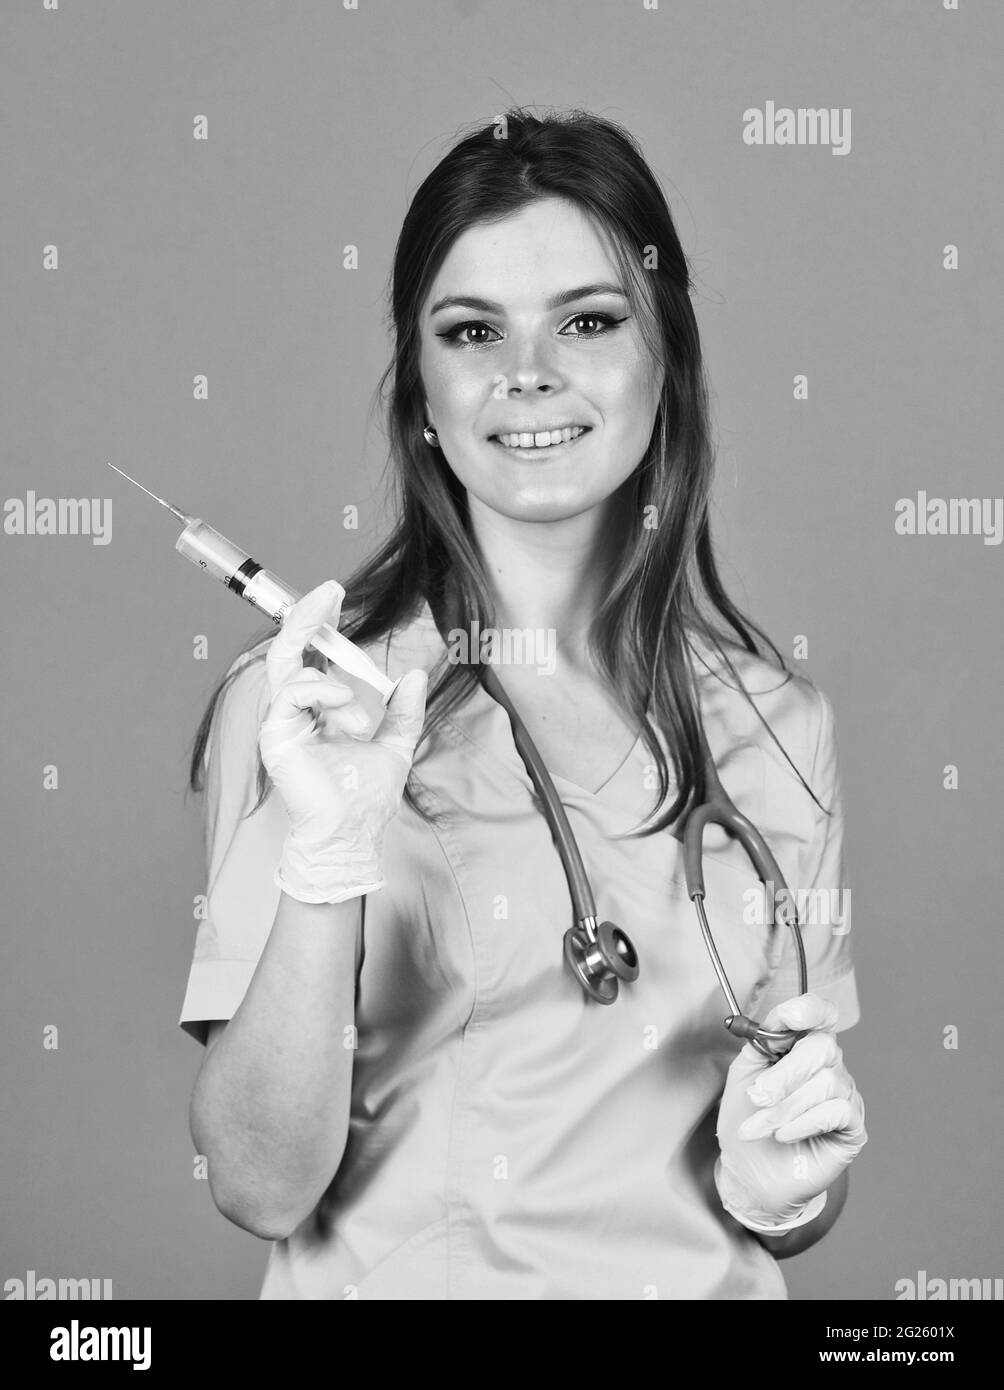 woman doctor use syringe. happy nurse make injection. health worker dials vaccine in syringe. Physician or therapist giving vaccine against virus Stock Photo